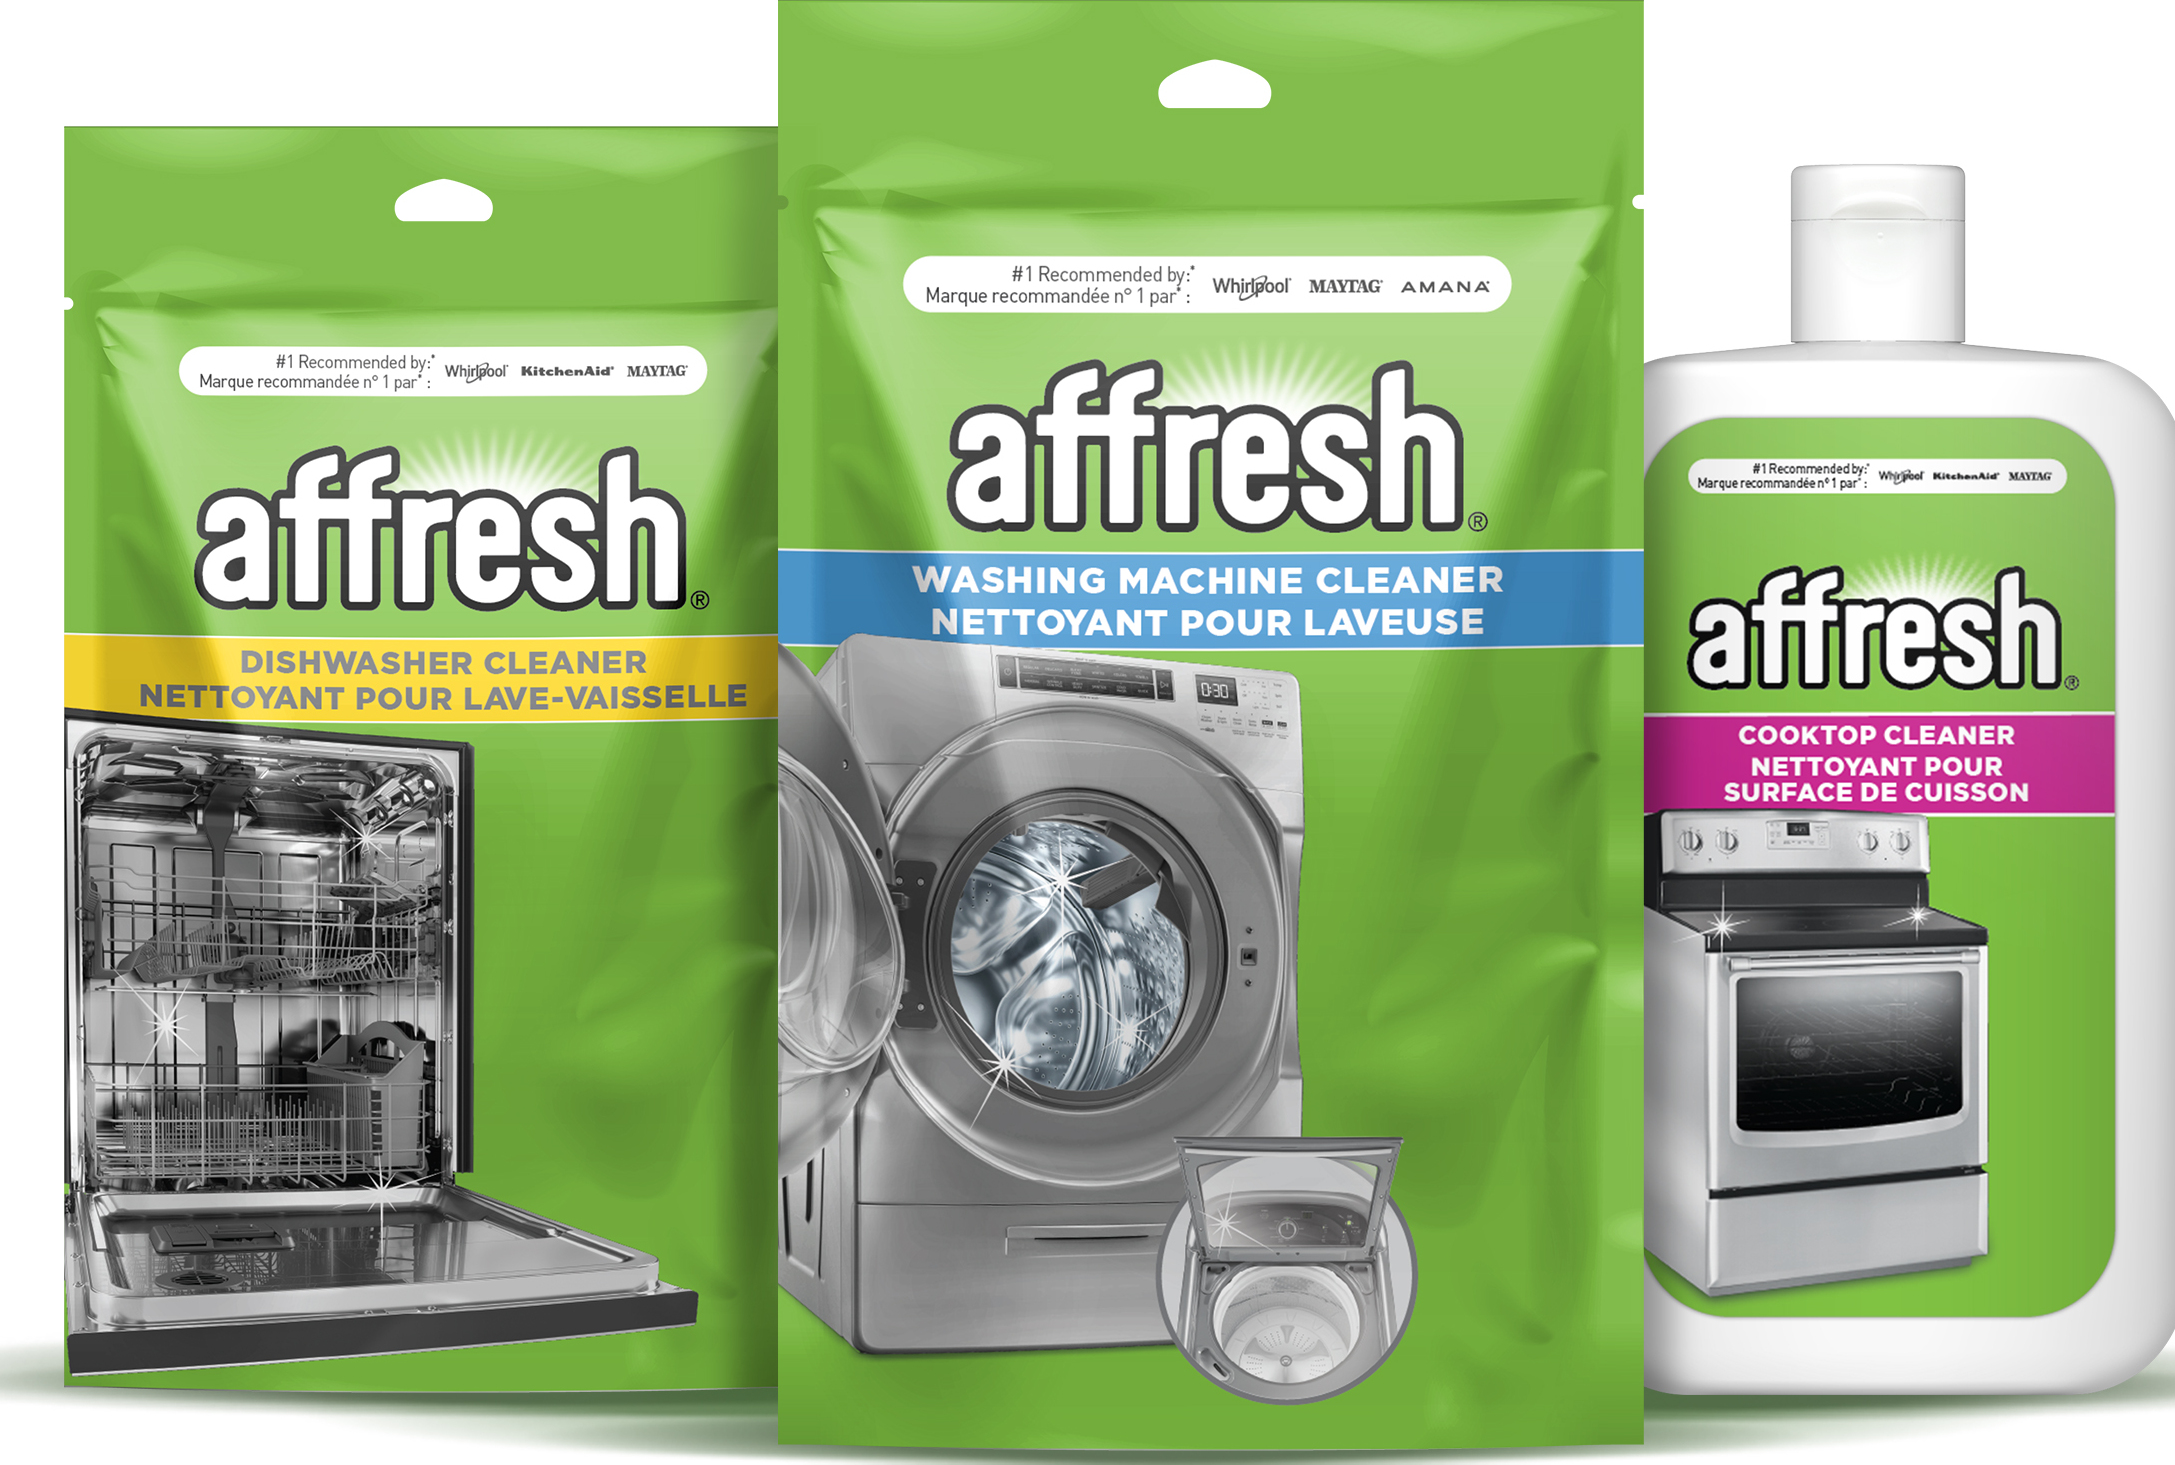 Three packages of affresh products: affresh Washing Machine Cleaner, affresh Dishwasher Cleaner and a bottle of affresh Cooktop Cleaner